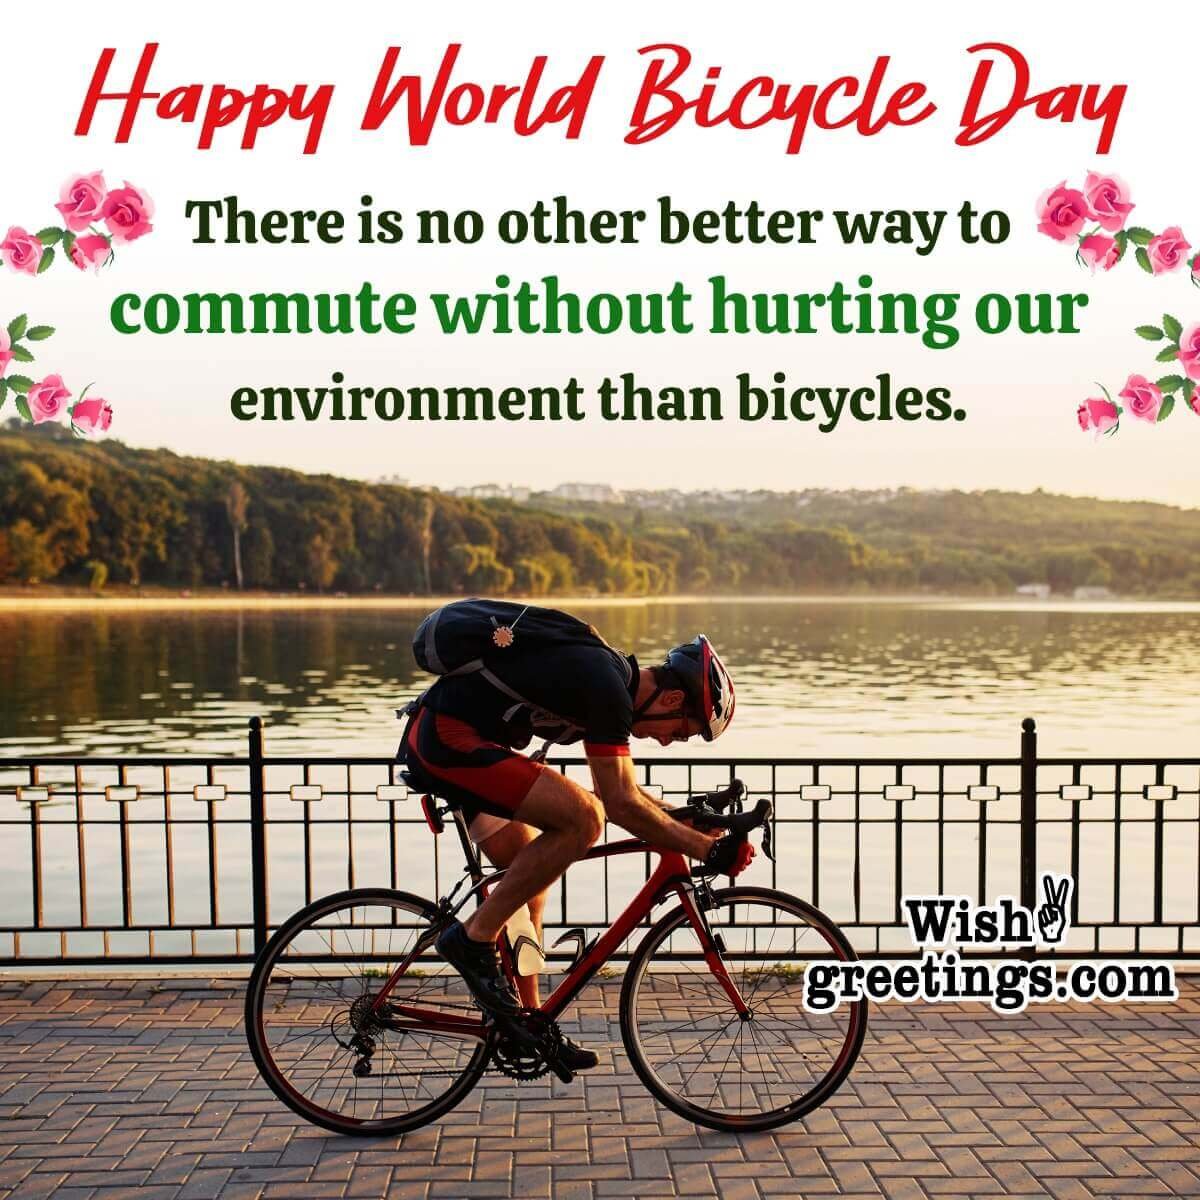 World Bicycle Day Message Pic